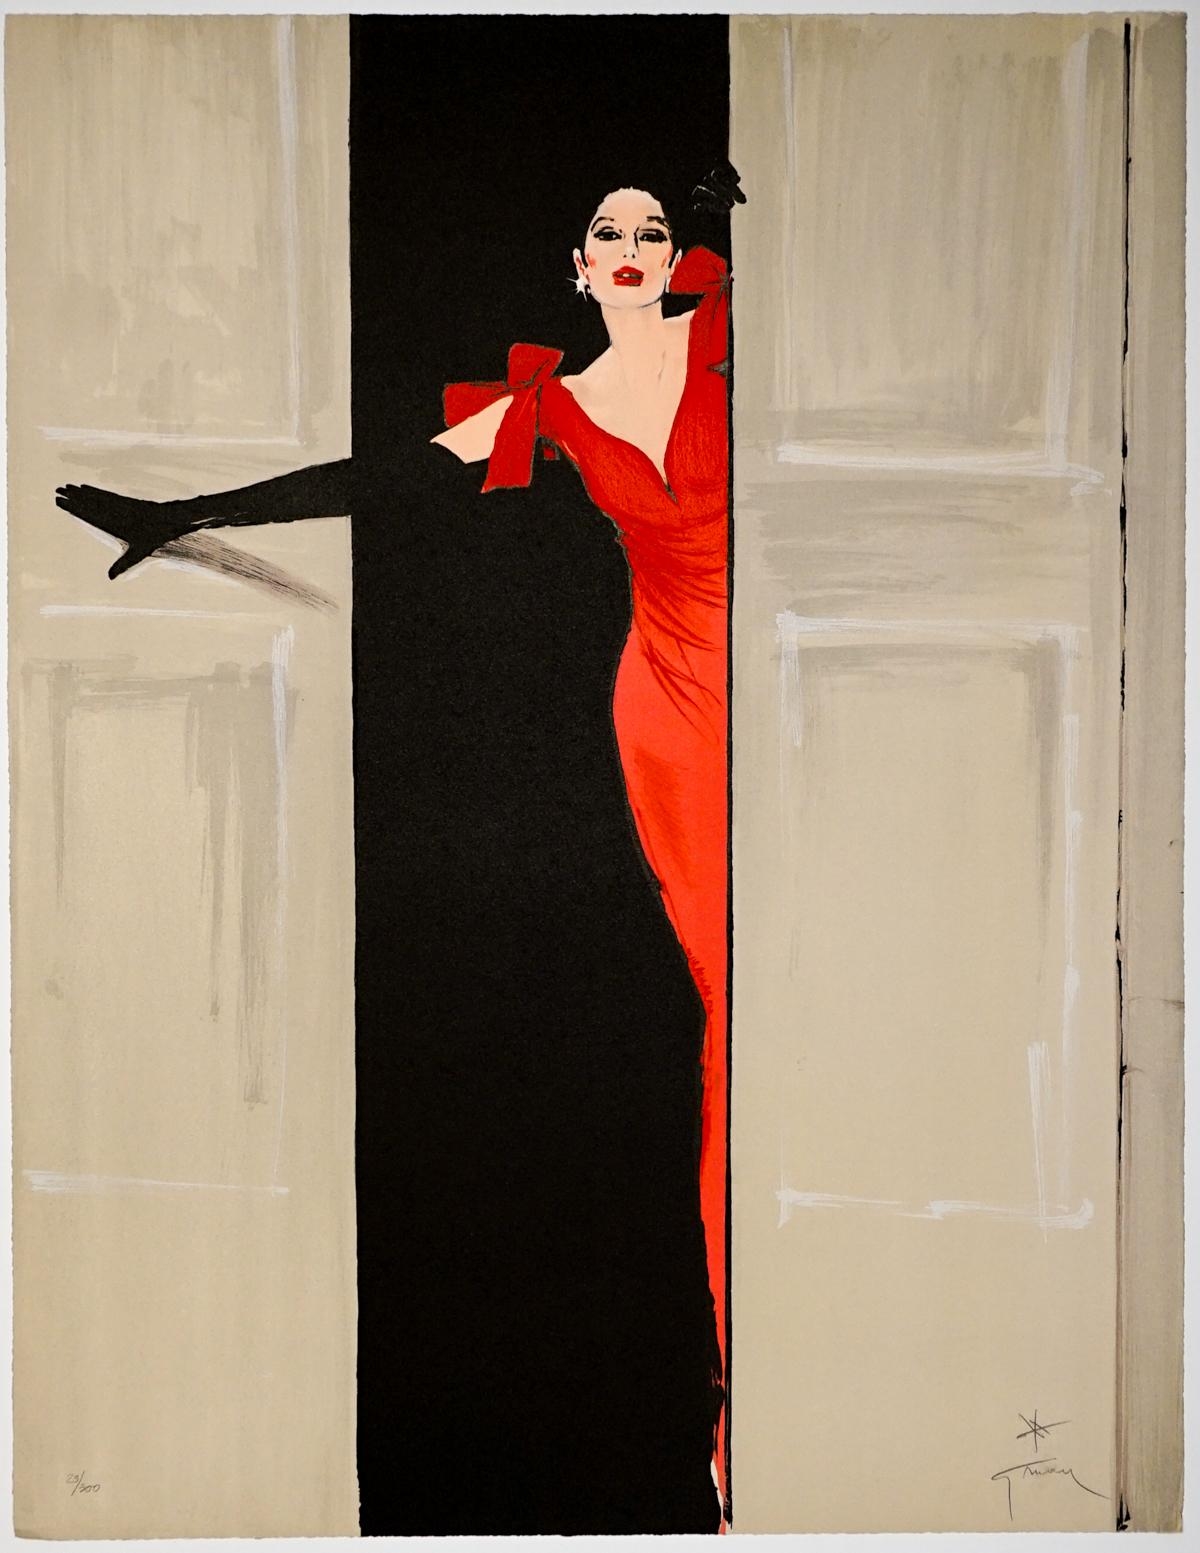 Artwork by René Gruau, Lady In Red Dress, Made of lithograph